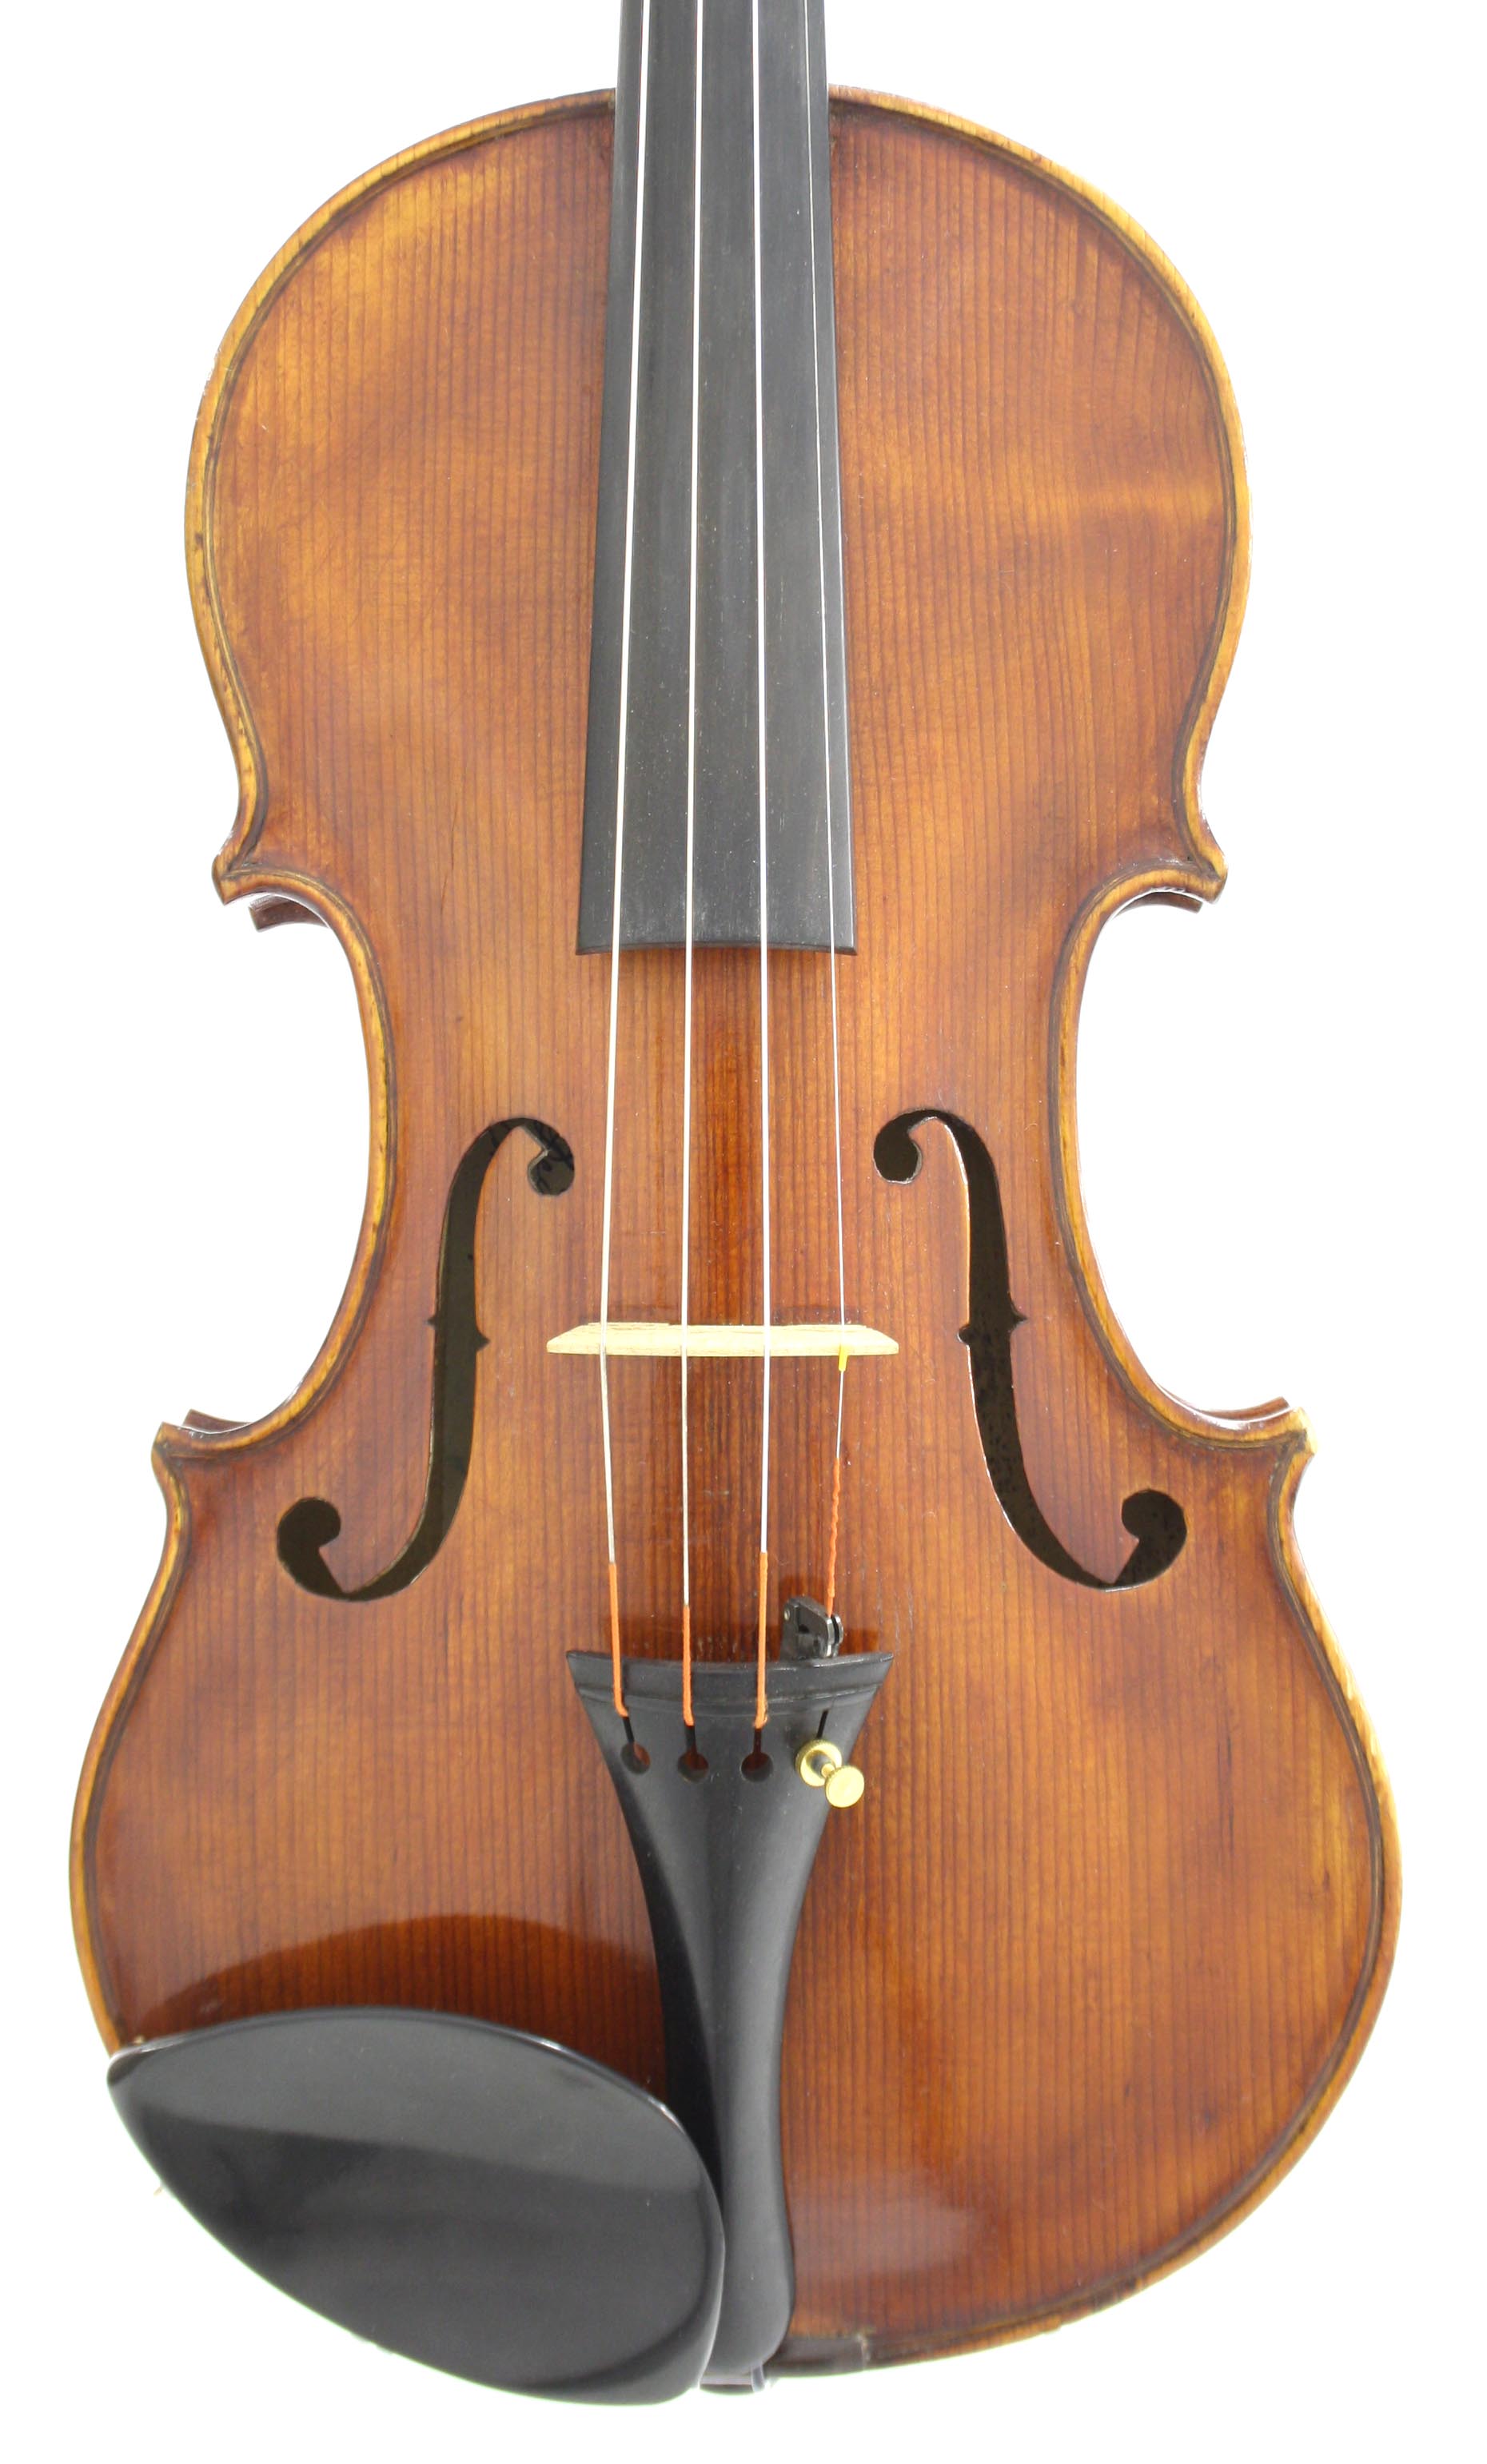 Argentinian violin by and labelled Dante Baldoni Fece in Buenos Aires, anno 1948, the one piece back